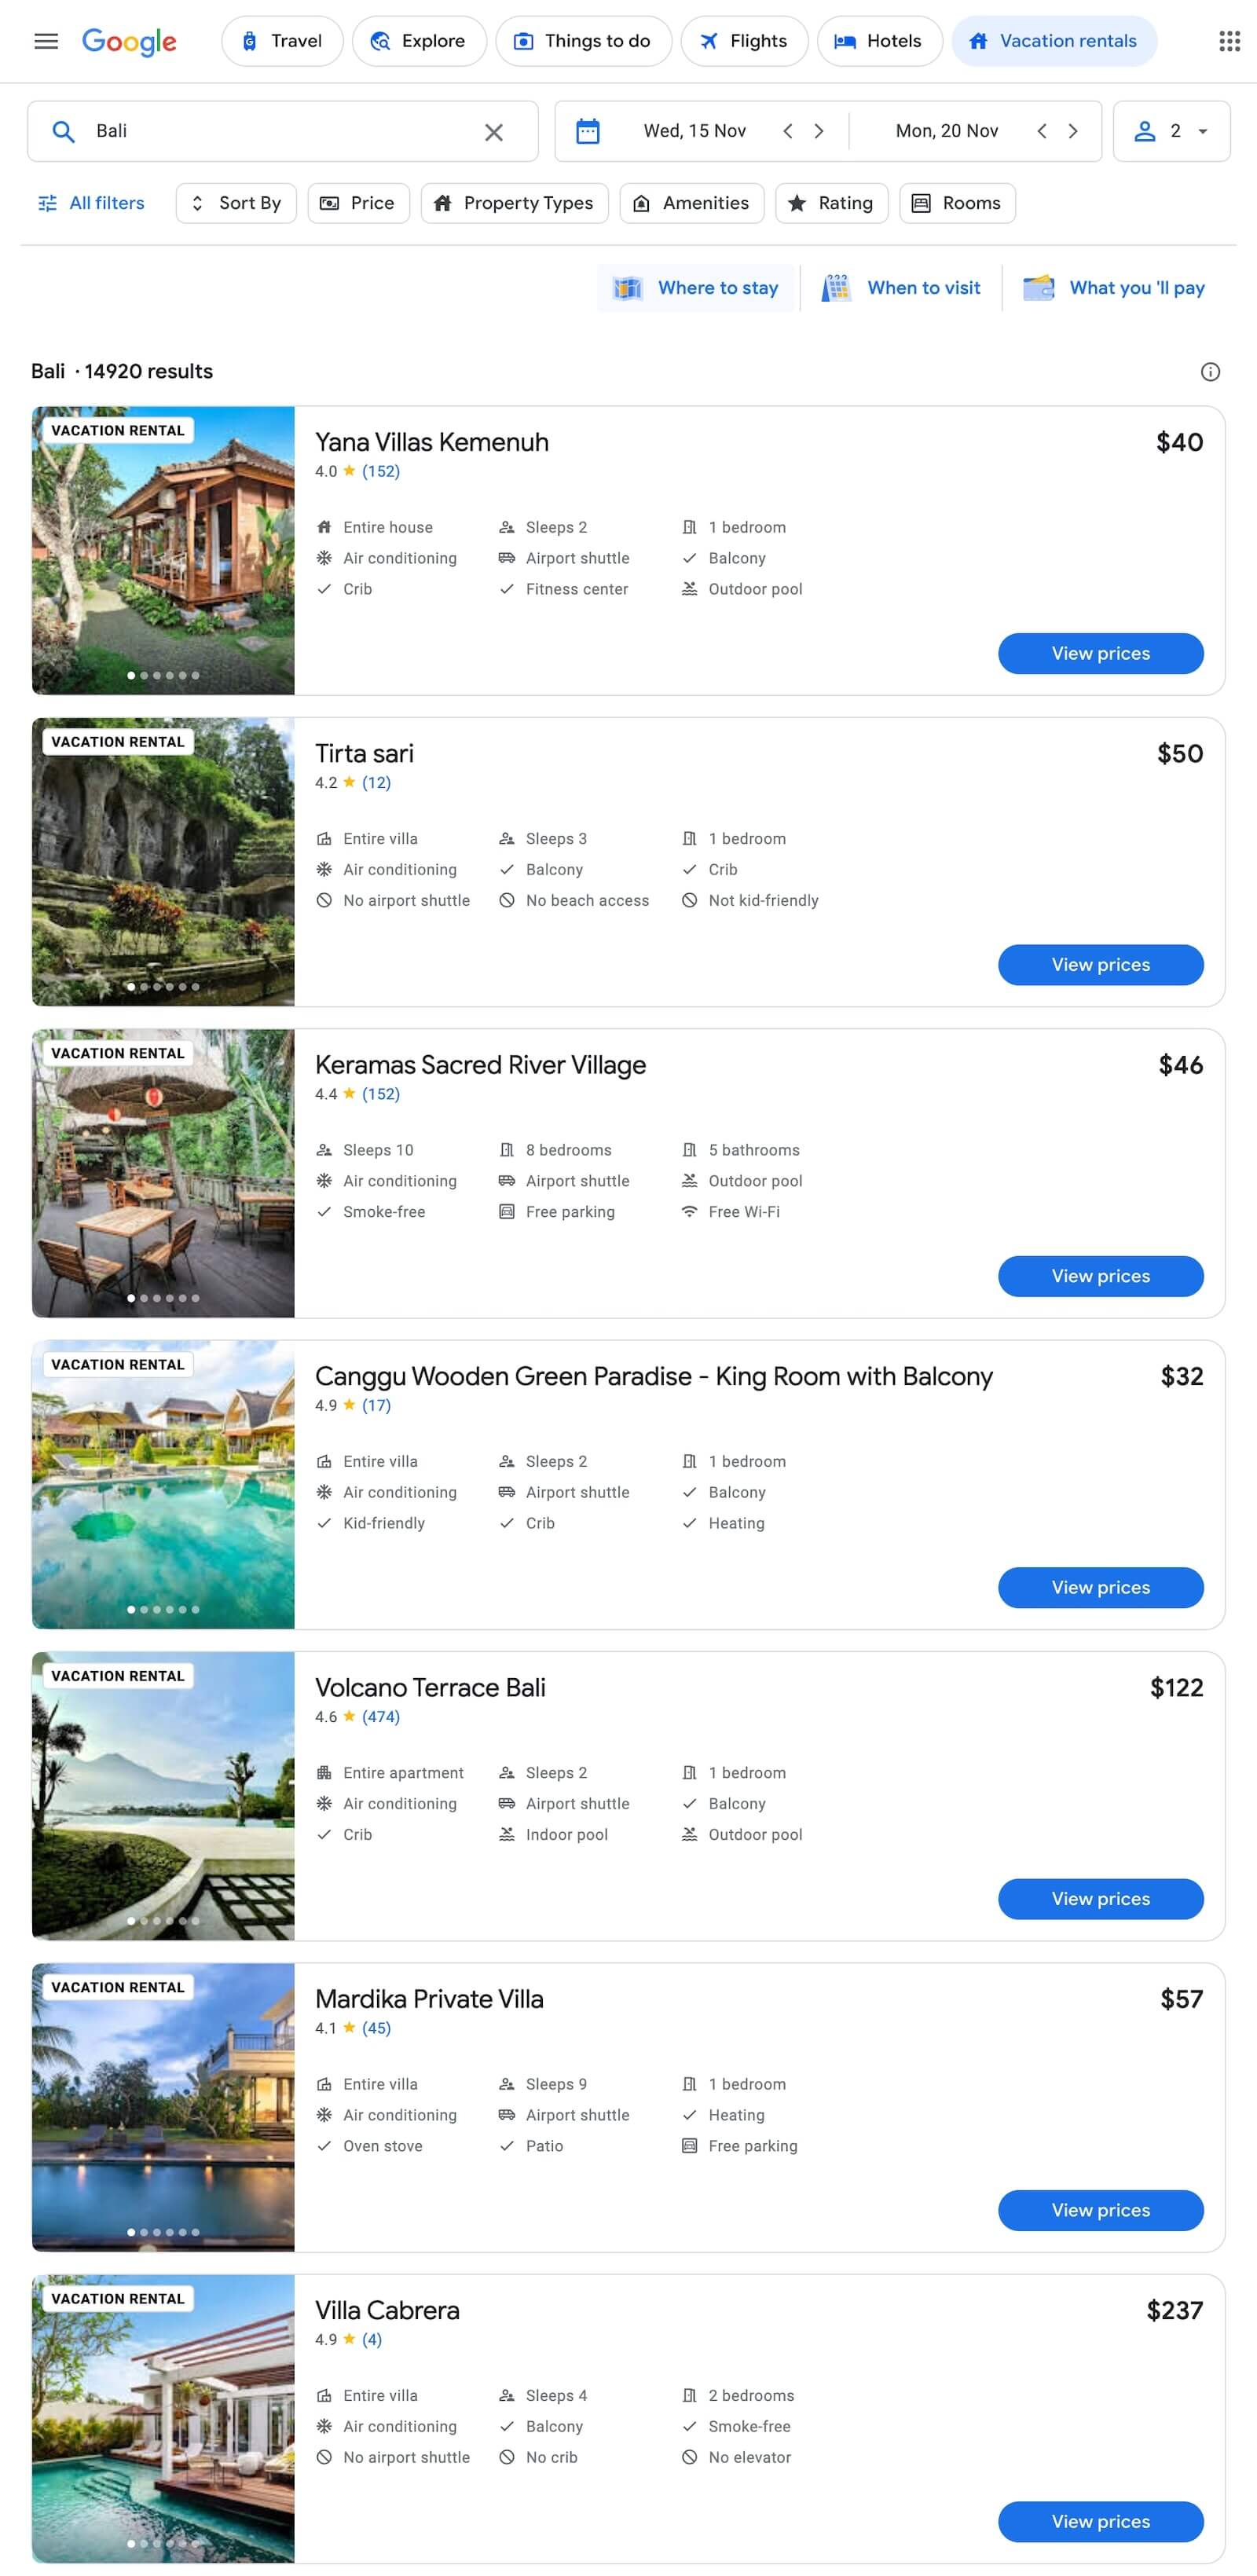 Example Vacation Rentals with q: Bali